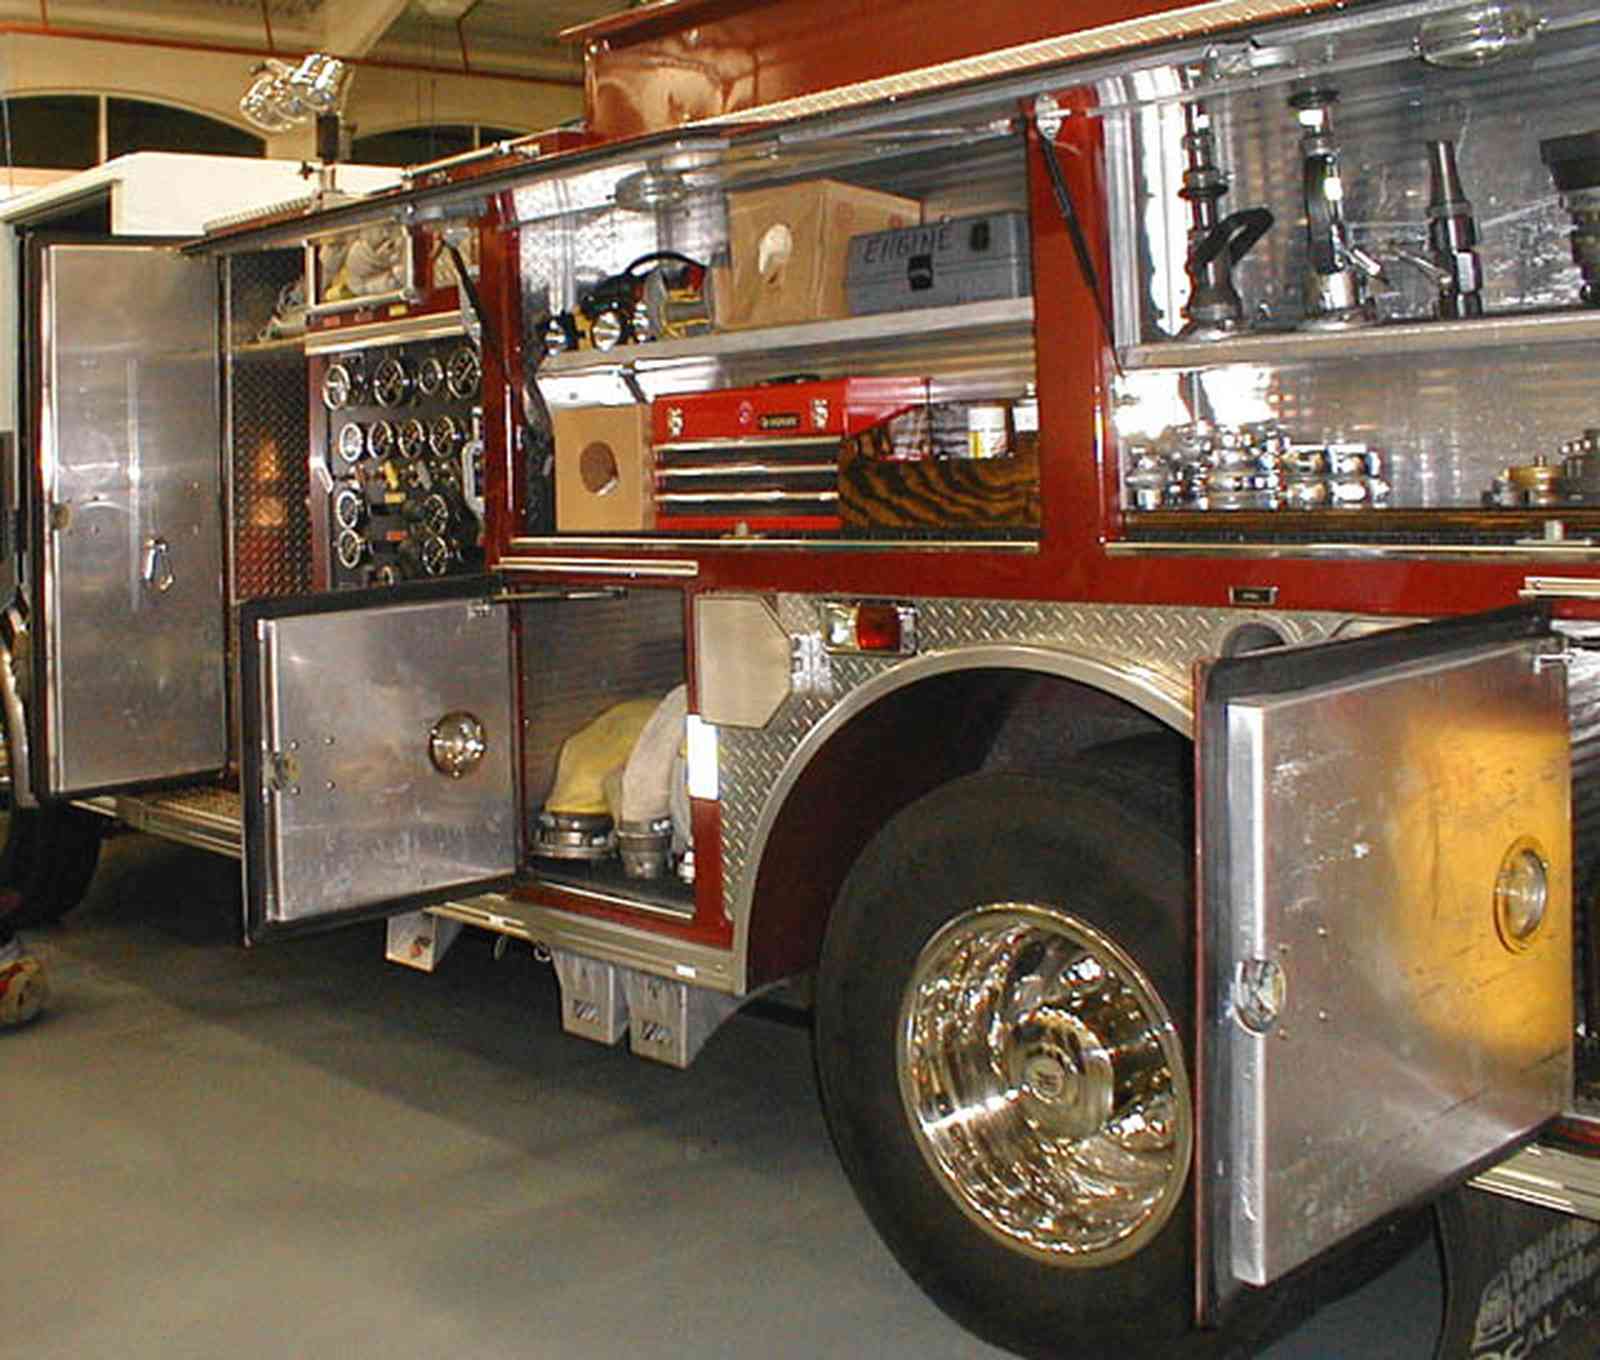 Old-East-Hill:-Firehouse-Number-One_04a.jpg:  fire engine, pumper, fire house, fireman, emergency response